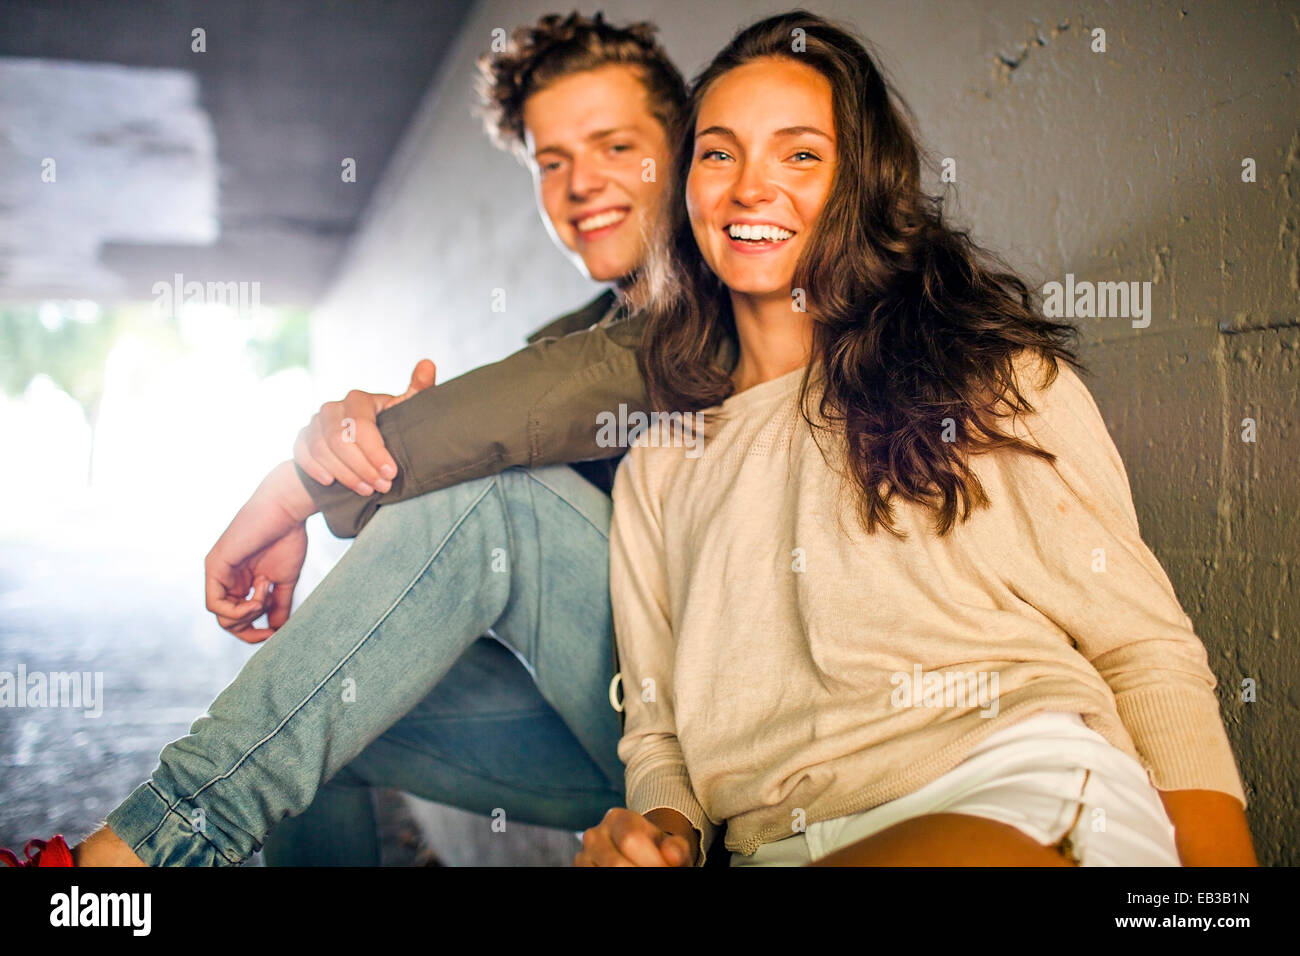 Caucasian couple smiling in tunnel Banque D'Images